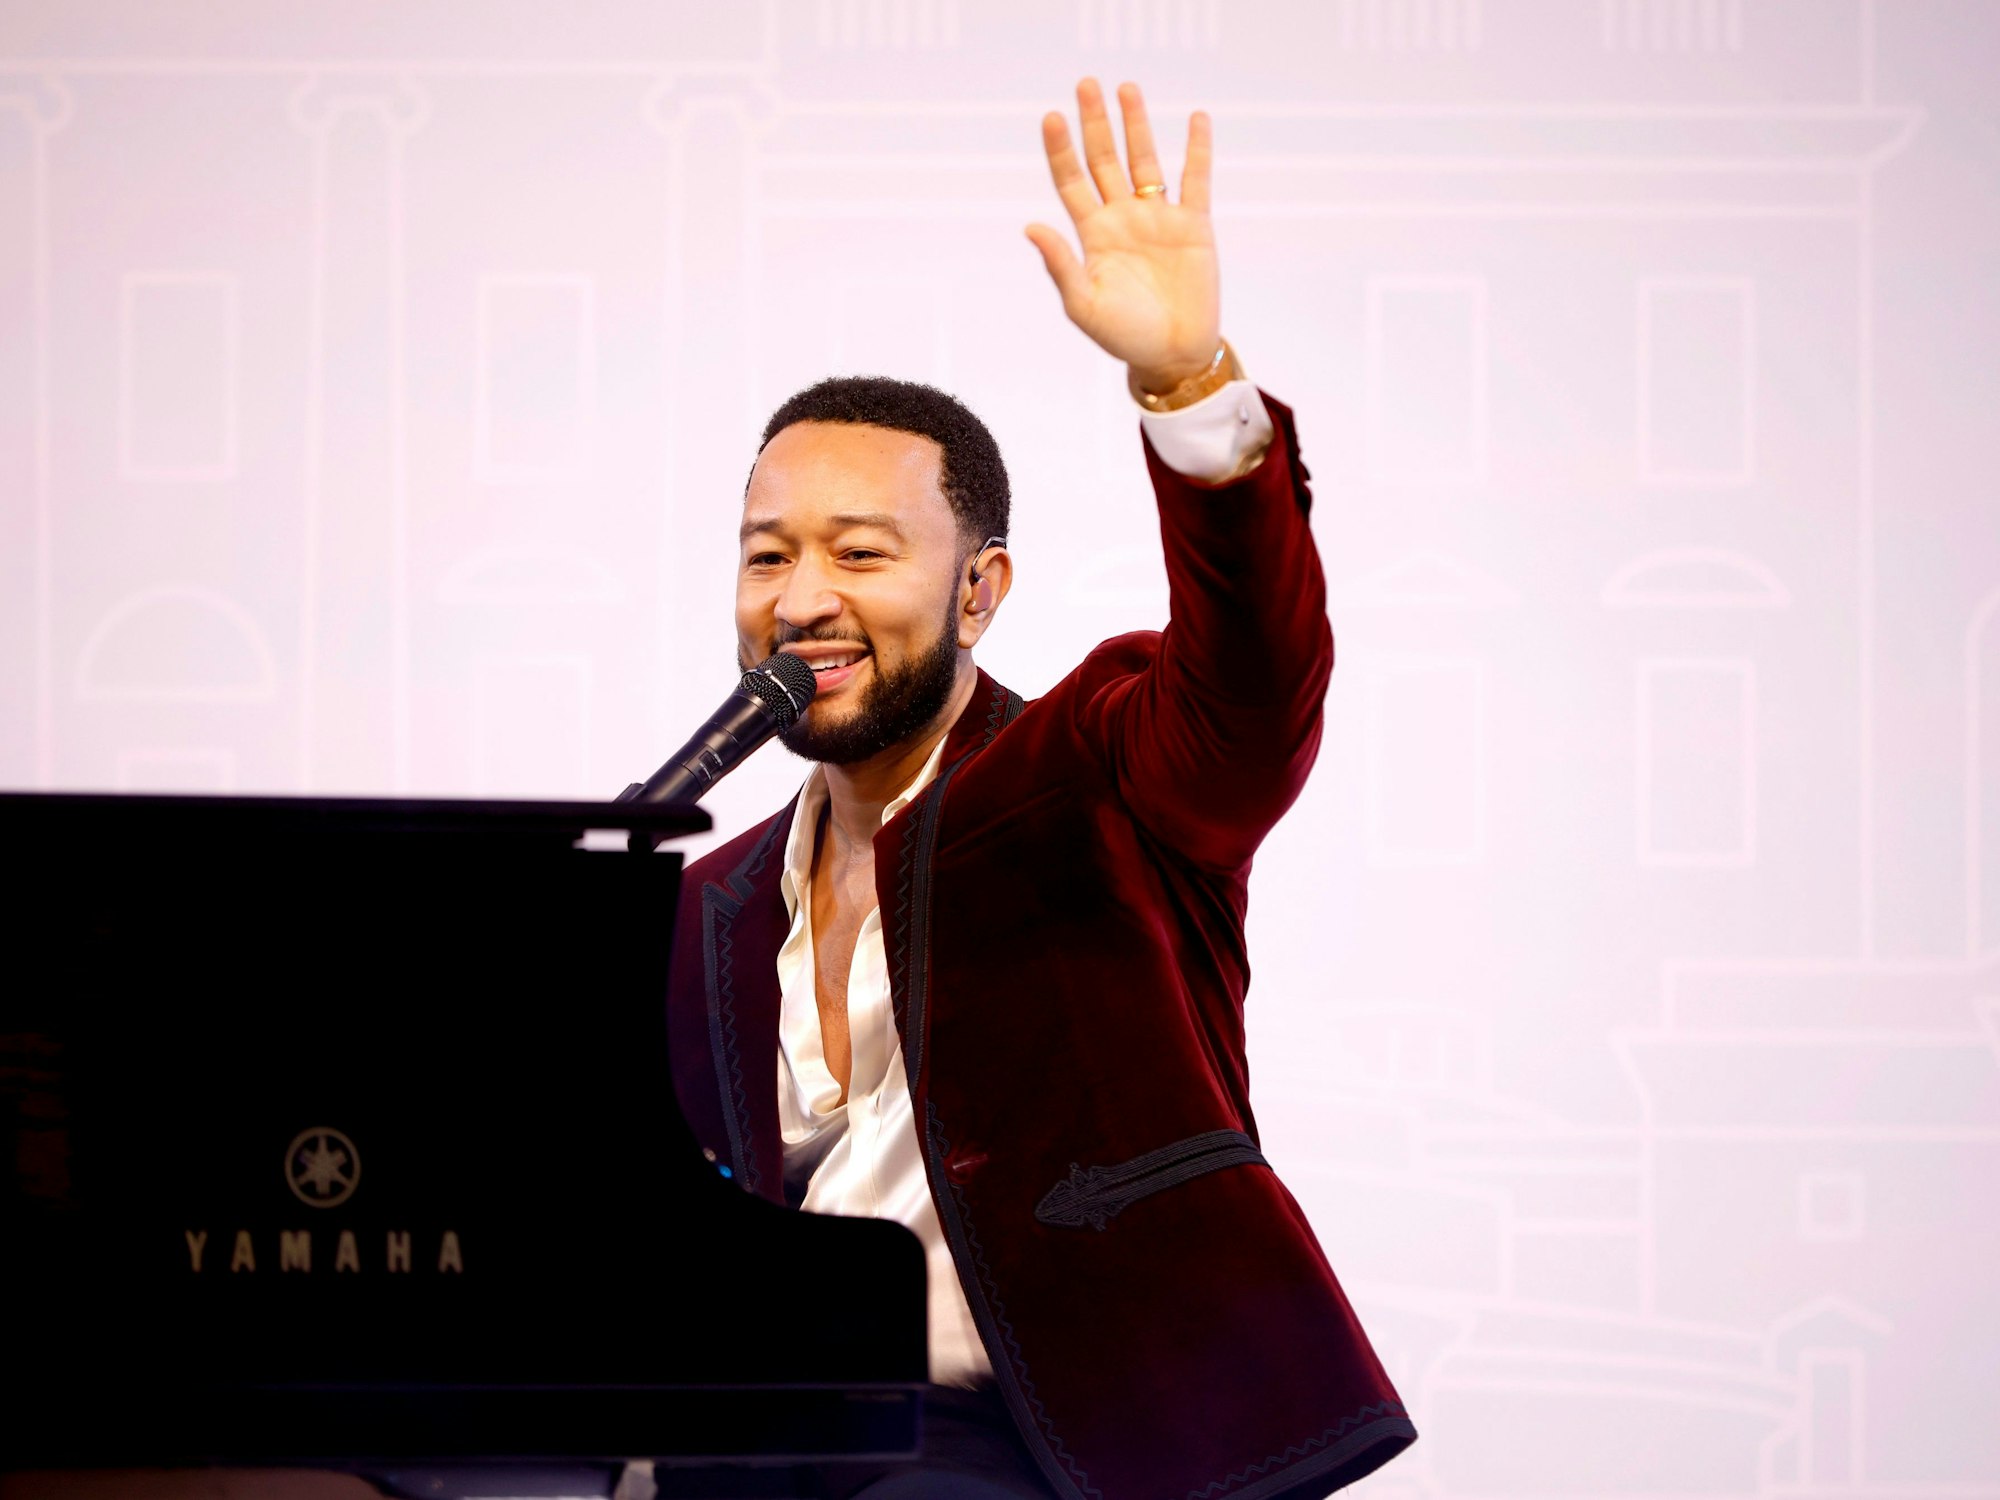 WASHINGTON, DC - DECEMBER 16: John Legend, multiplatinum artist, producer and EGOT winner shares his passion for music with Hilton Honors members during a live performance at Waldorf Astoria DC on December 16, 2022 in Washington, DC. The exclusive event highlights the one-of-kind packages available on the Hilton Honors Experiences platform. (Photo by Tasos Katopodis/Getty Images  for Hilton Honors)